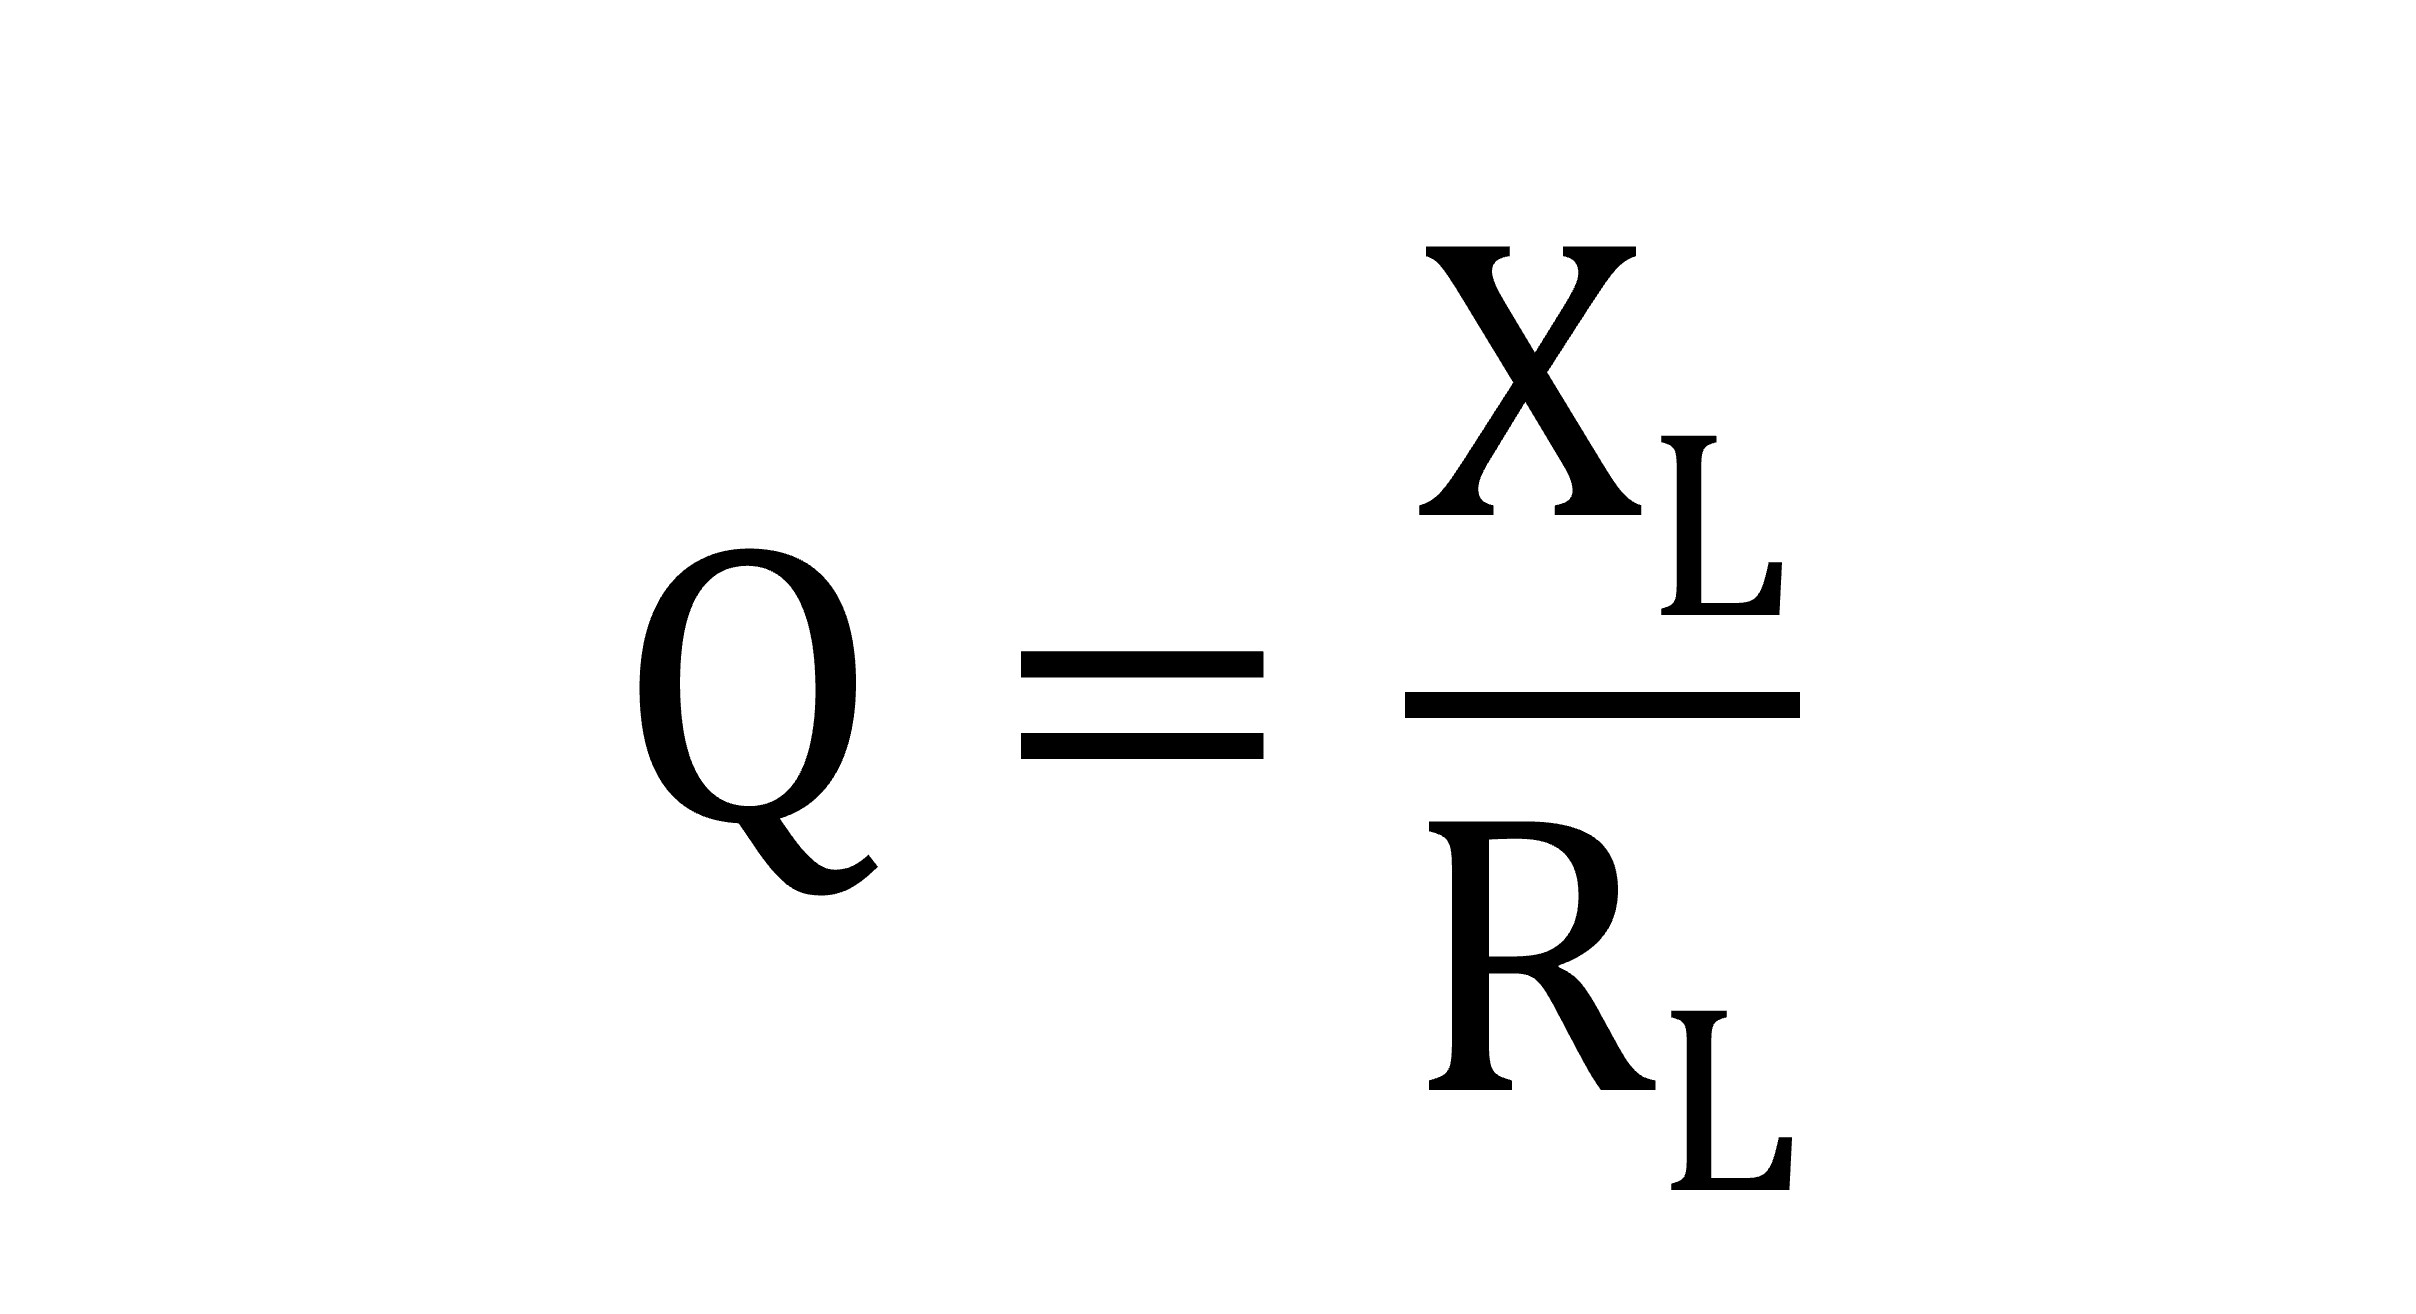  Calculation of Q value and ACR 